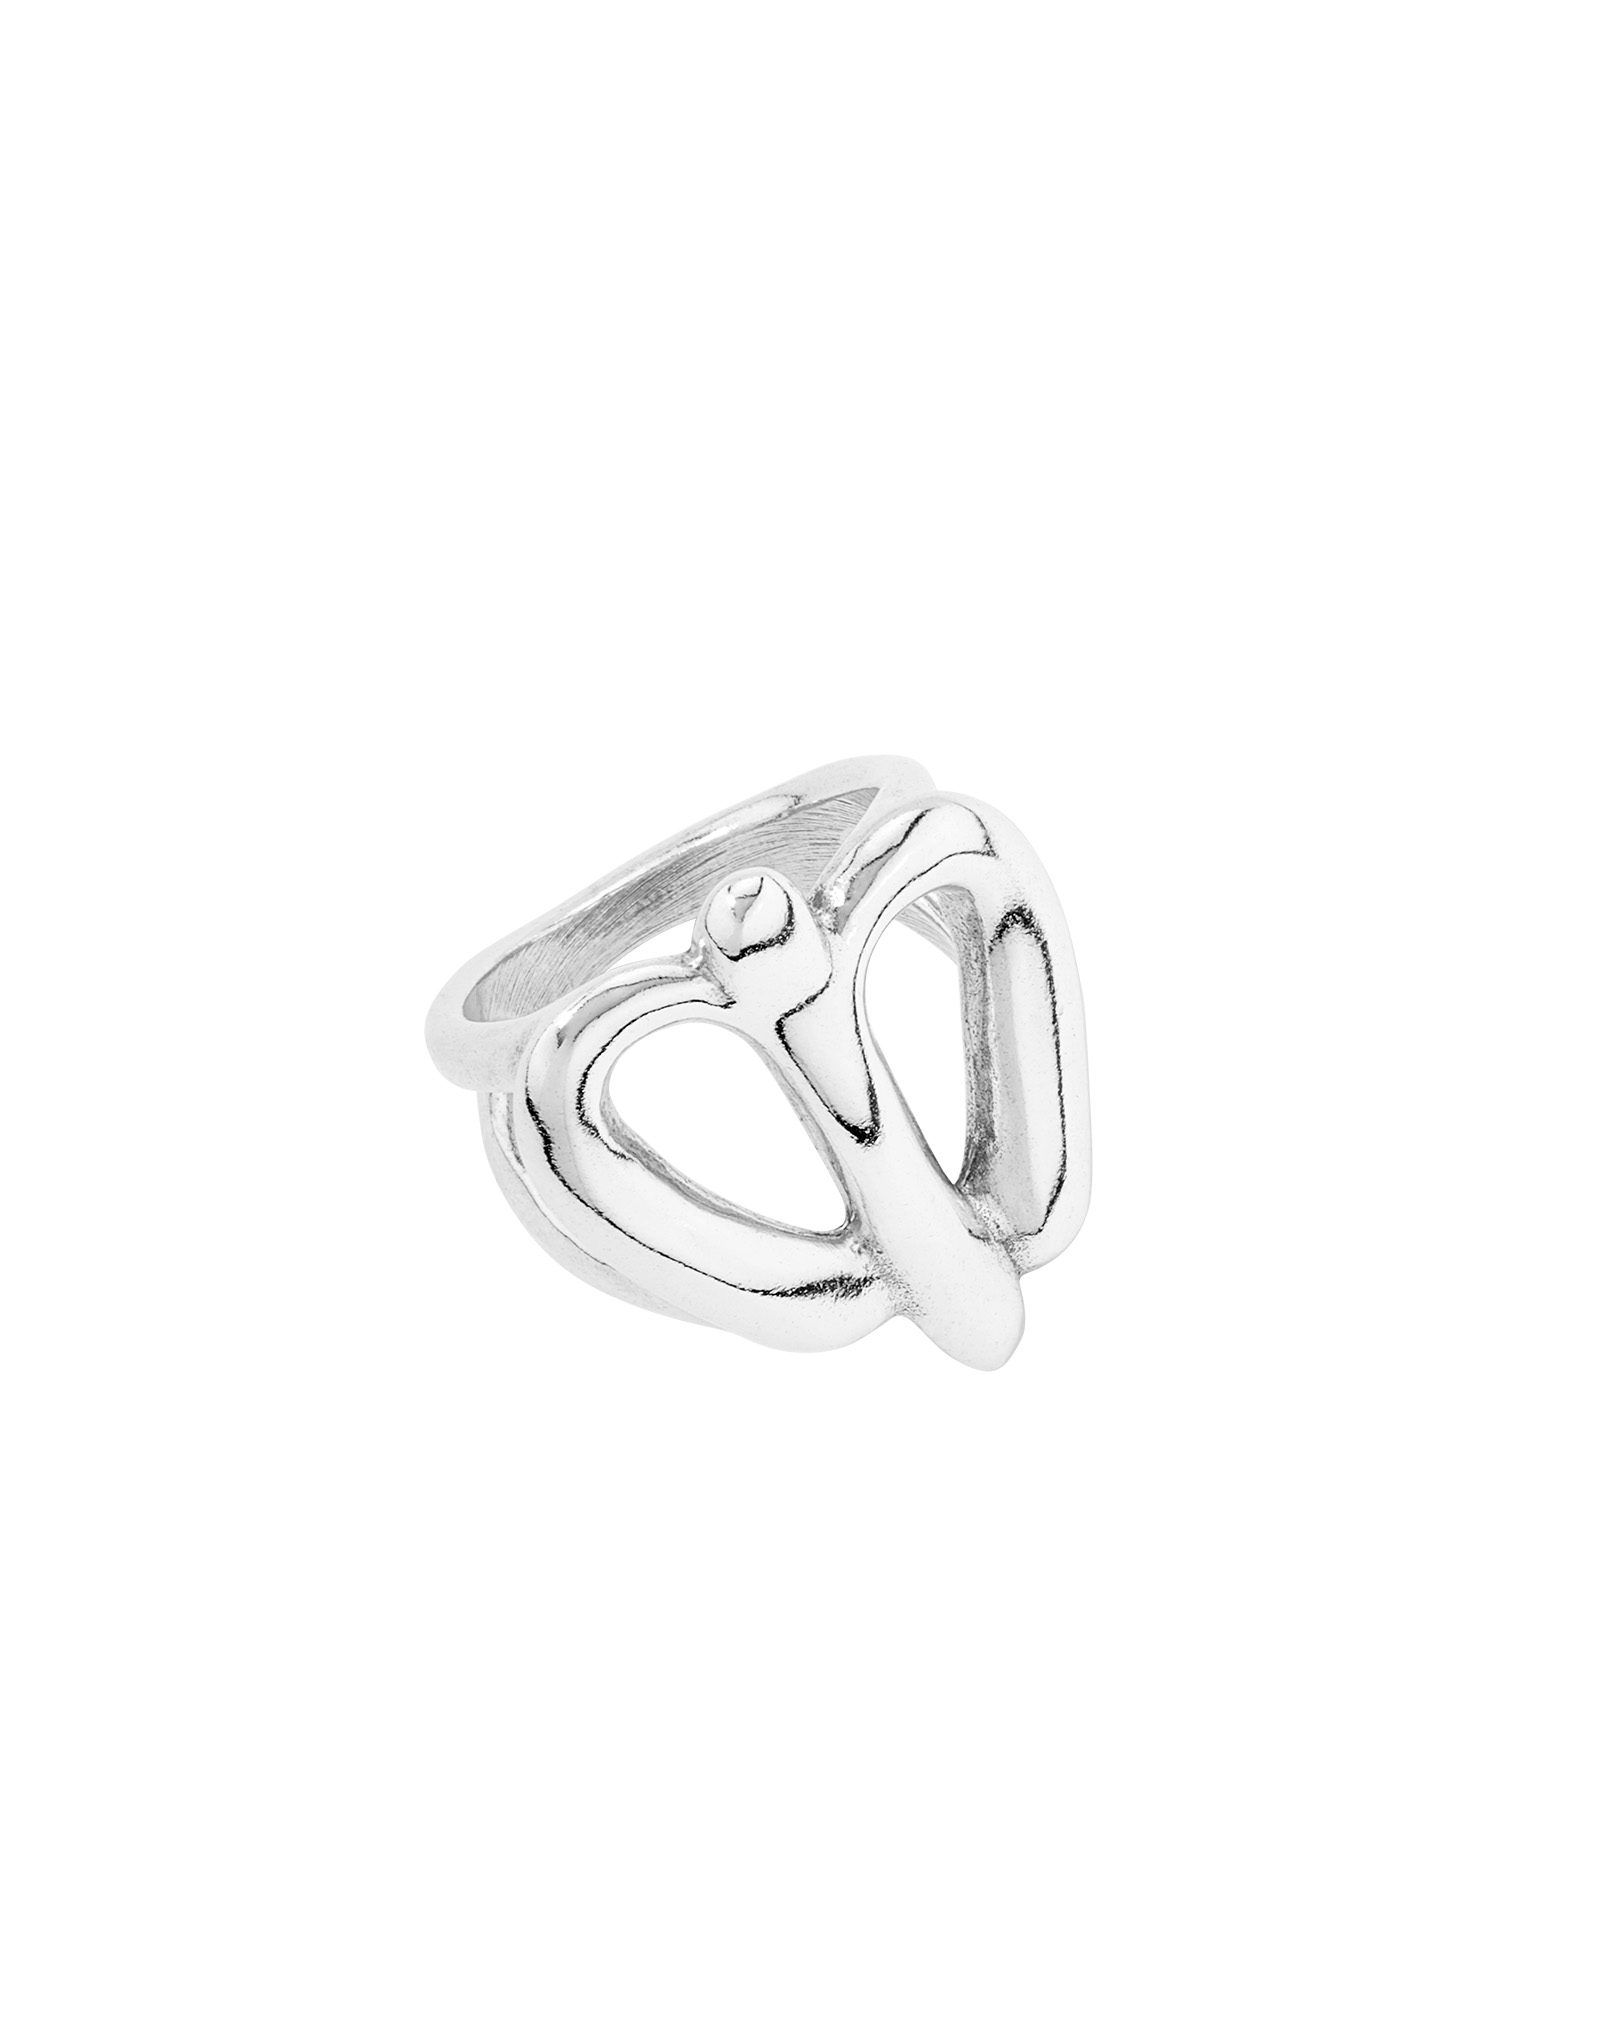 FLY BABY FLY Ring, Silver, large image number null